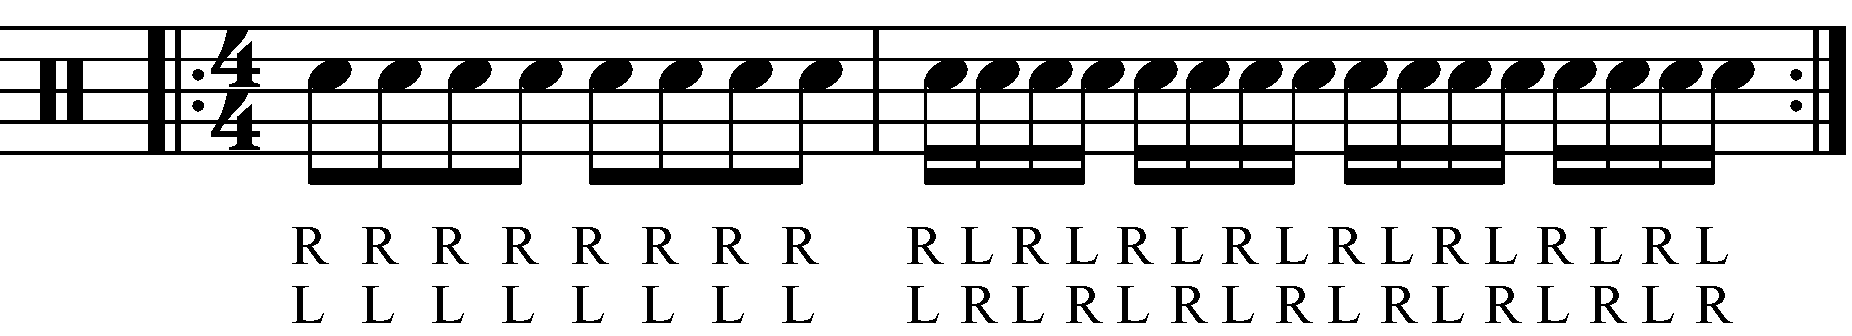 The eighth note version of the exercise